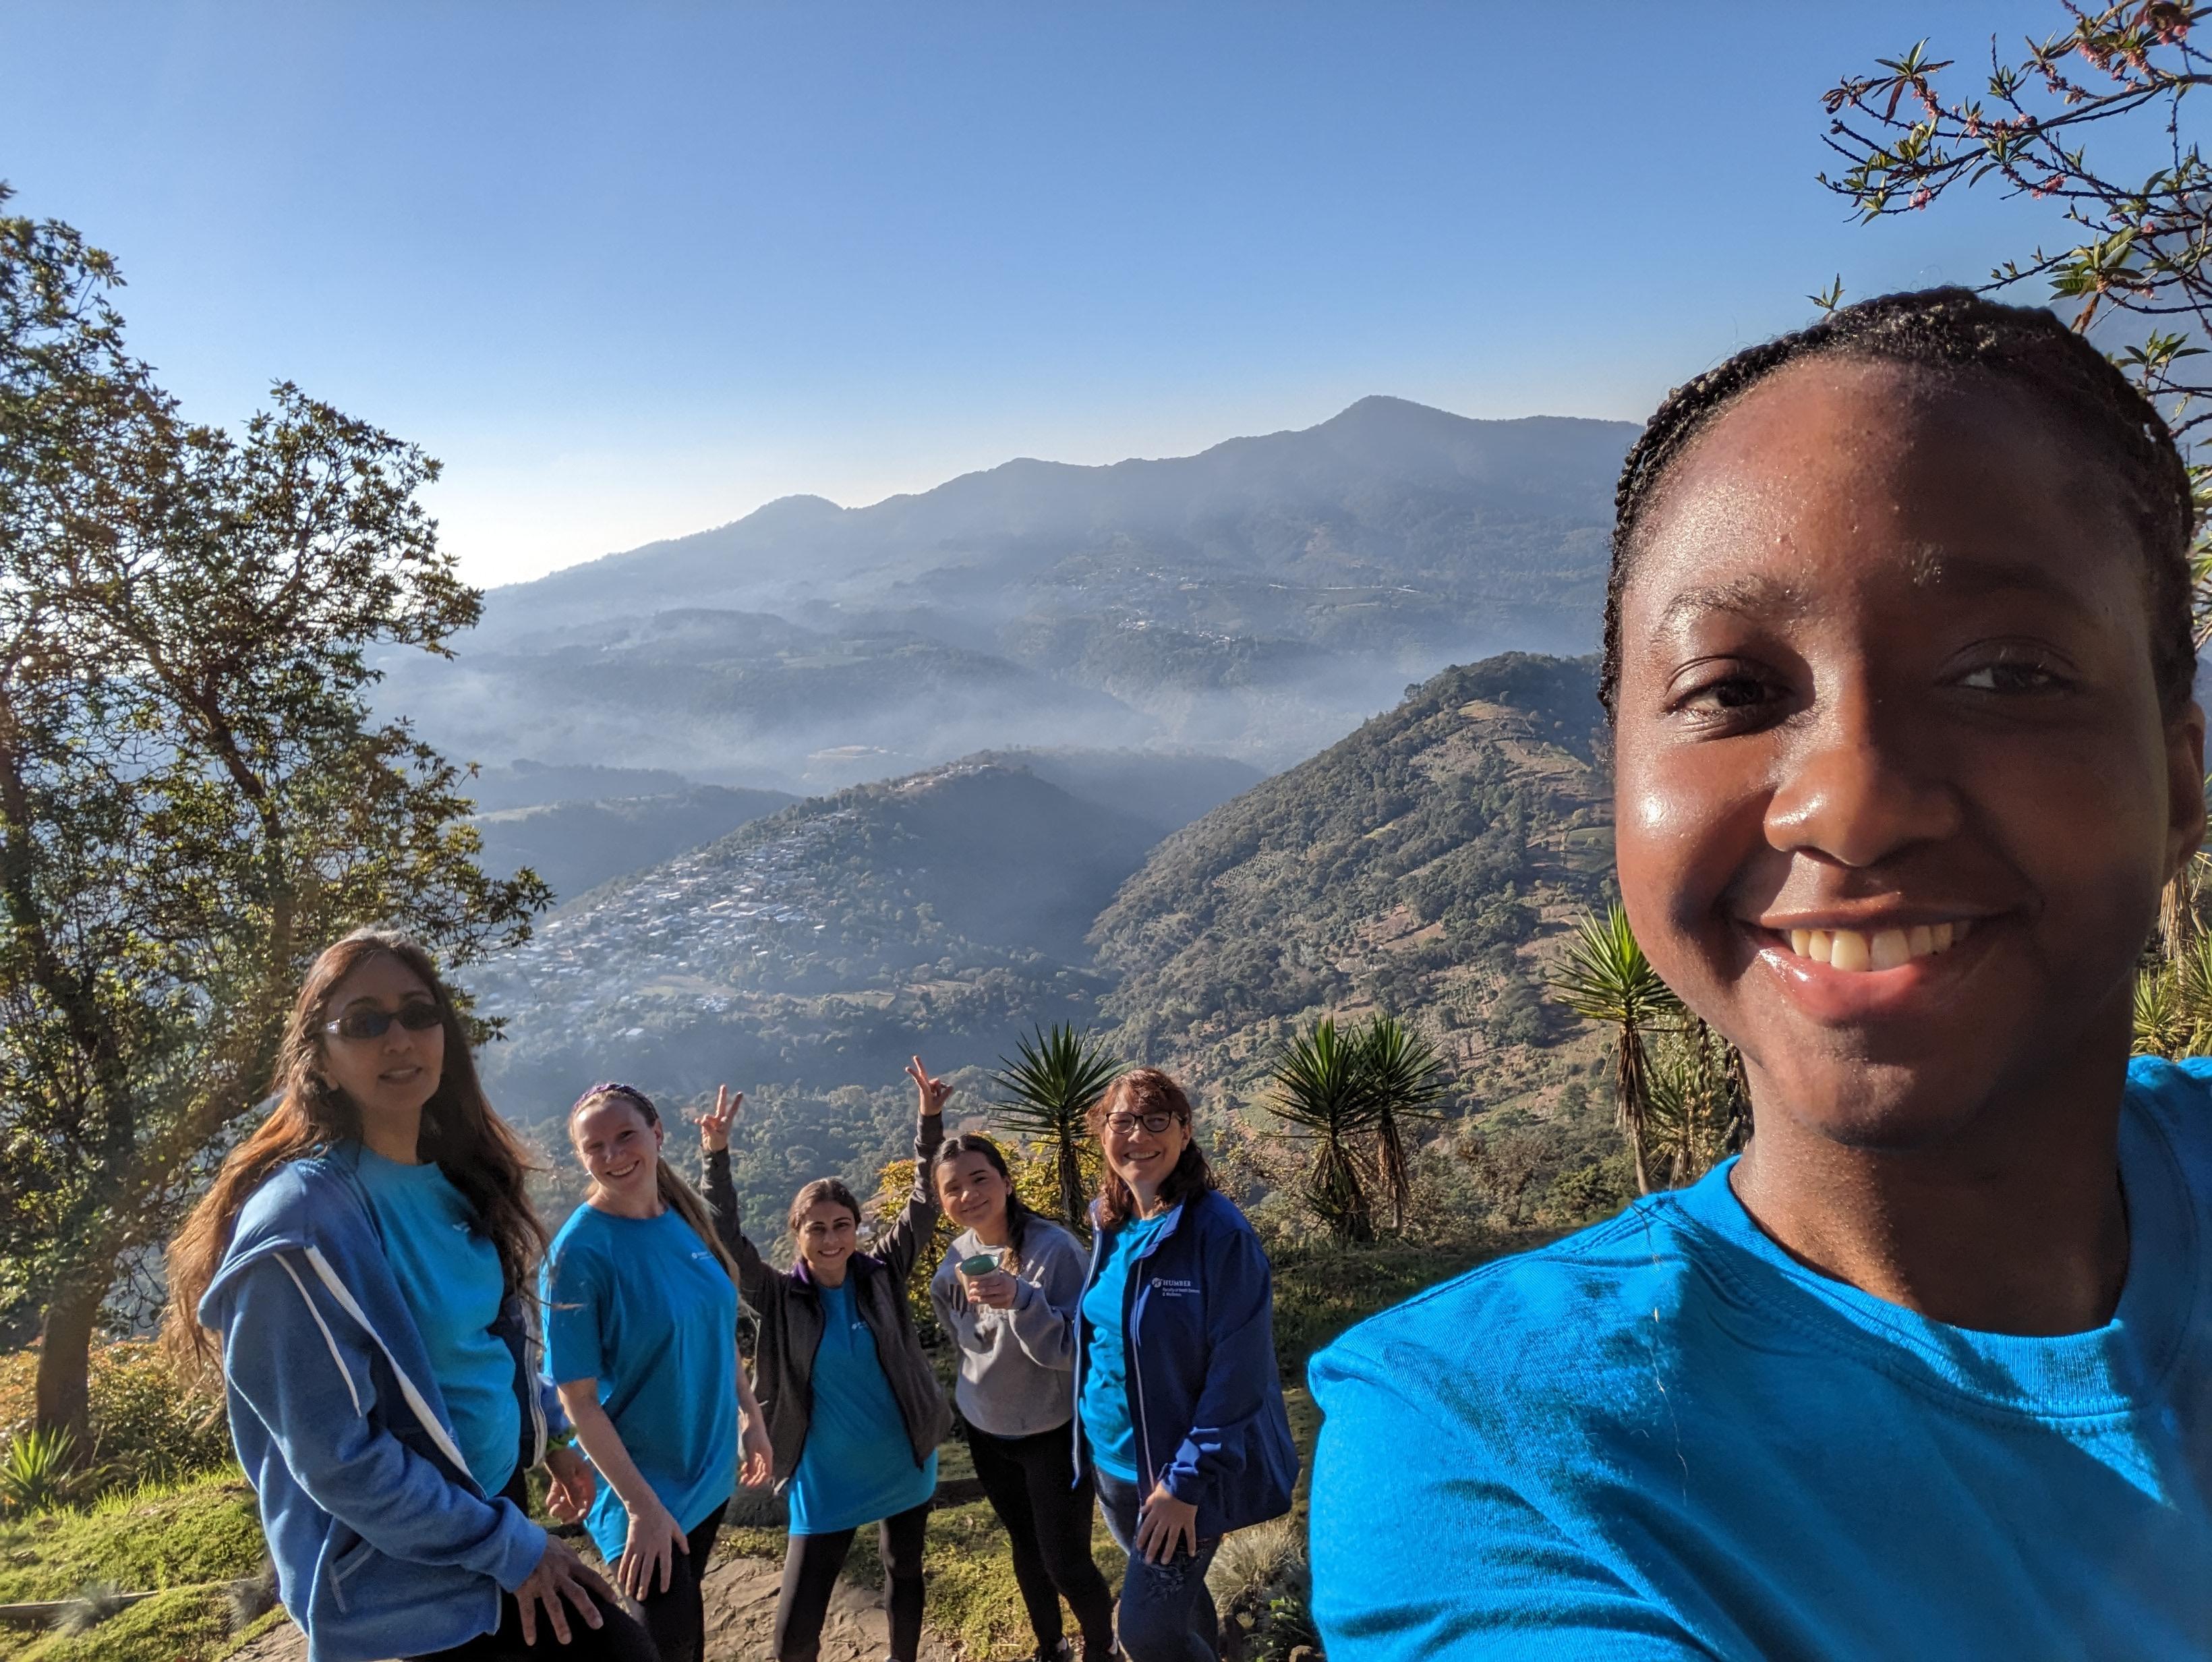 Six people take a selfie with a picturesque mountainous area behind them in the background.